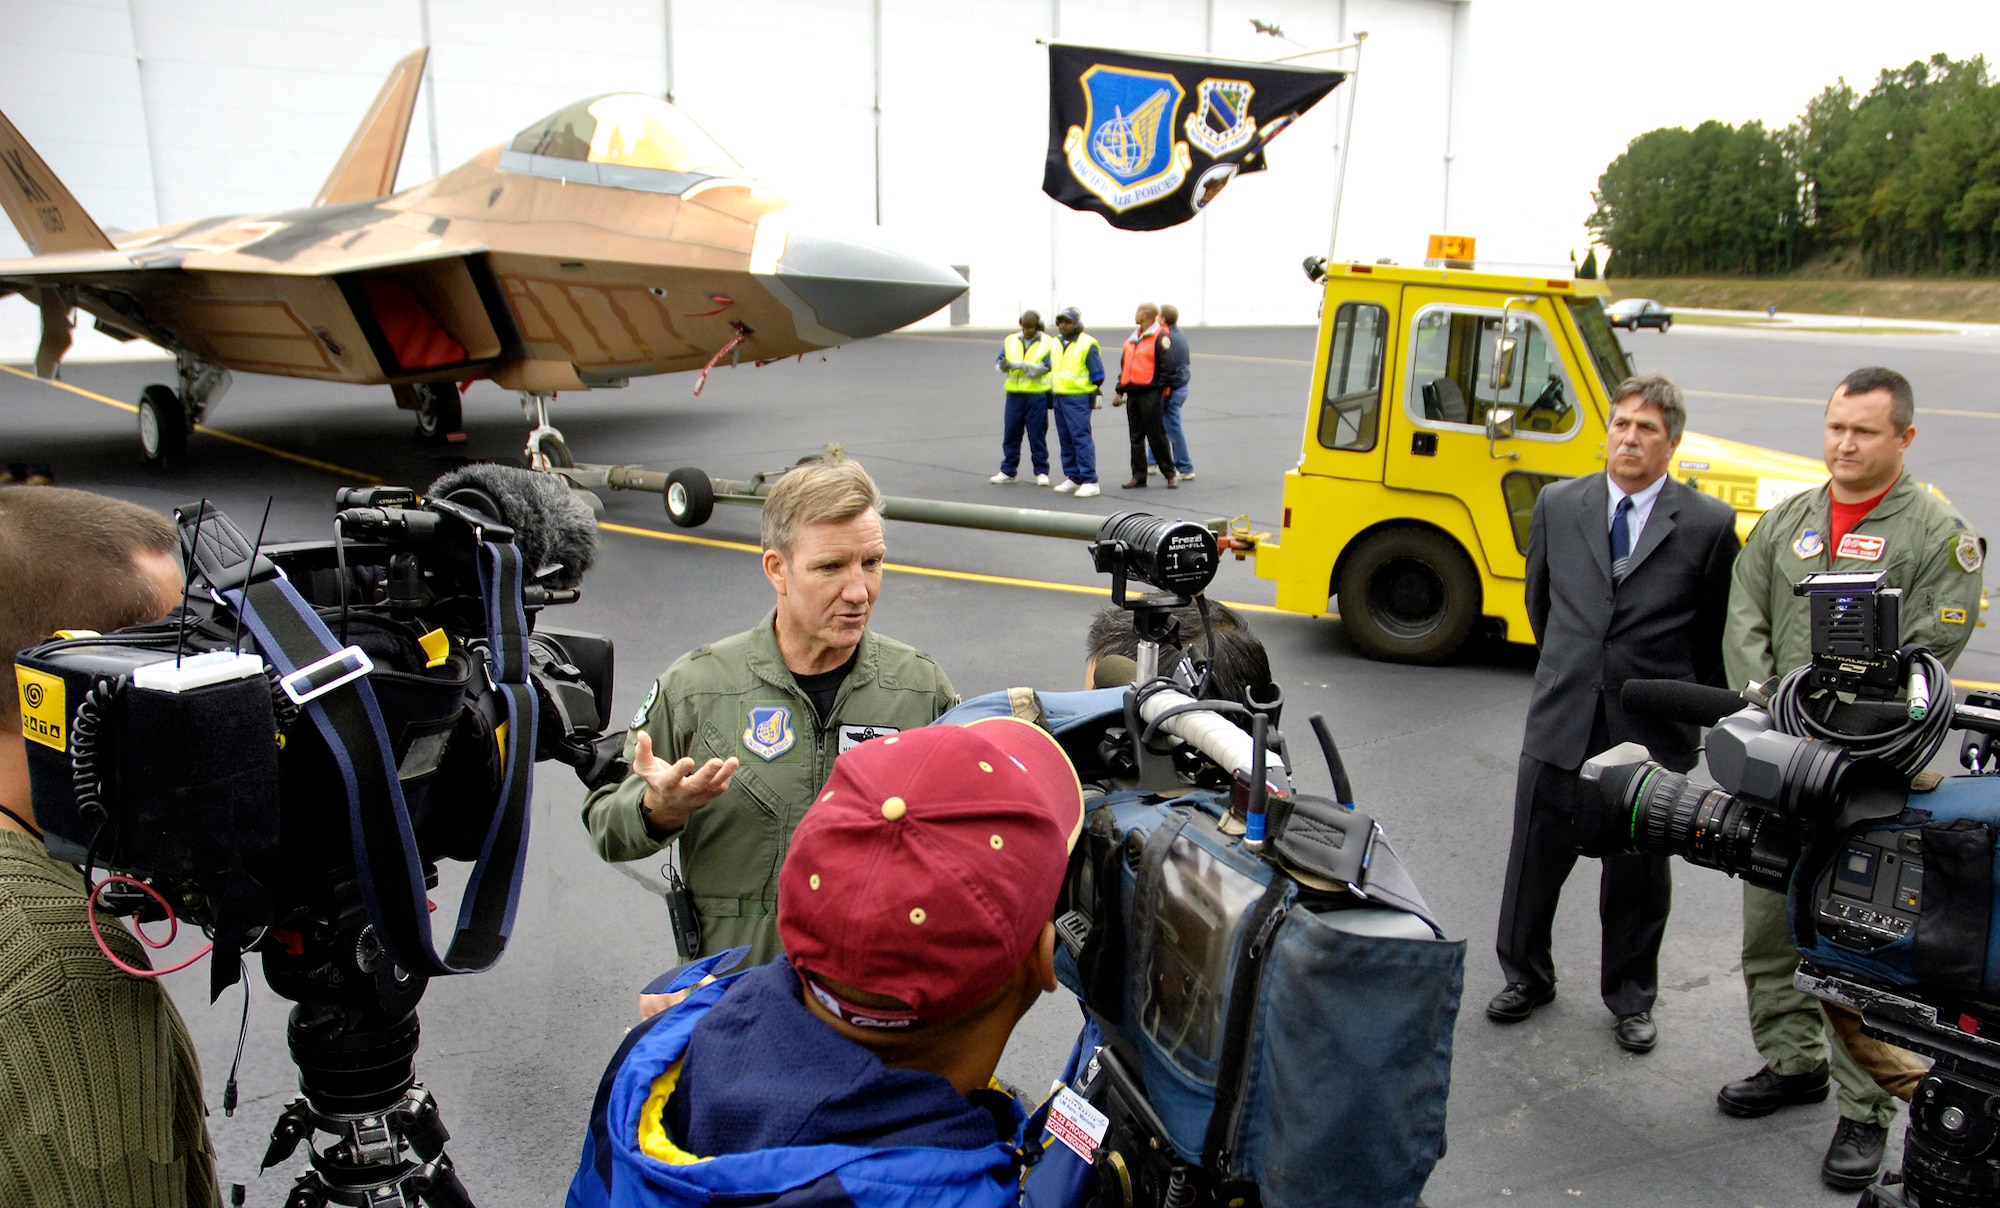 Brig. Gen. Herbert Carlisle, commander of the 3rd Wing at Elmendorf Air Force Base, Alaska, is interviewed after the roll-out of the Pacific's first combat ready F-22, destined for Elmendorf AFB.  The F-22 dominates any adversary through unmatched performance achieved through stealth, supercruise speed, agility, precision and a complete view of the battlespace achieved with the advanced sensor suite embedded in the aircraft.  (Photo by John Rossino)